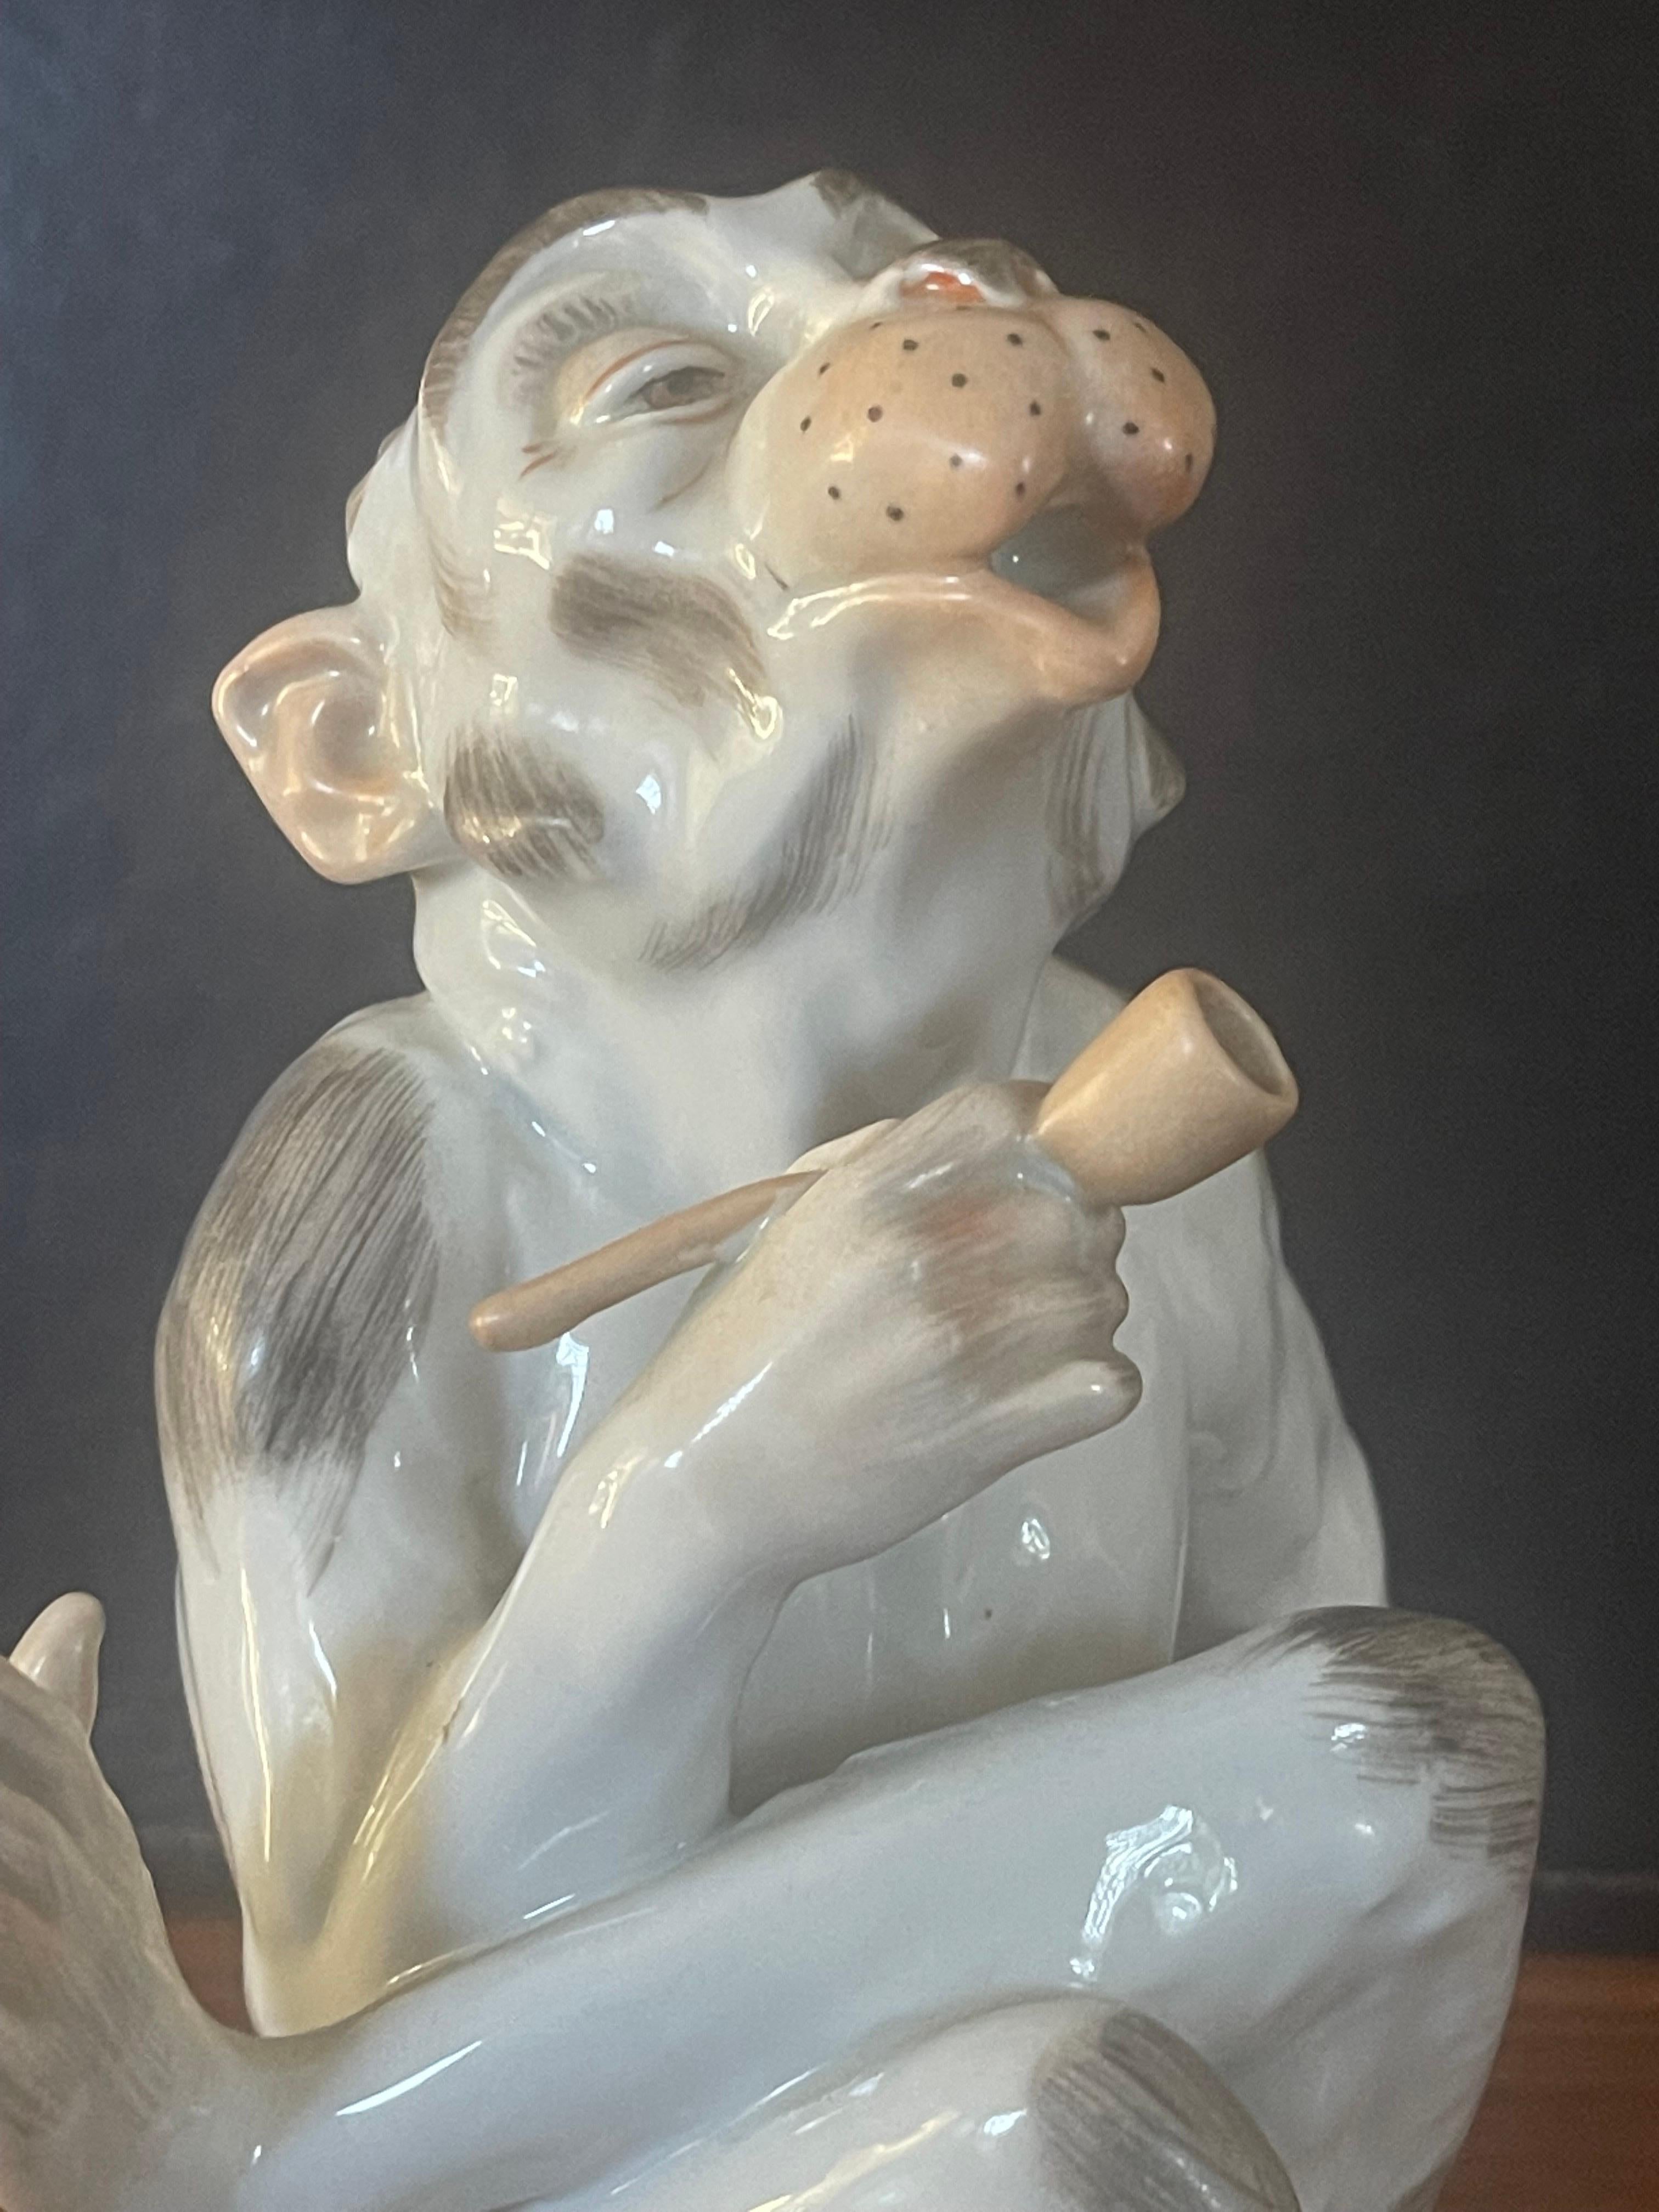 Porcelain Smoking Monkey with Pipe by Carl Thieme for Dresden 2